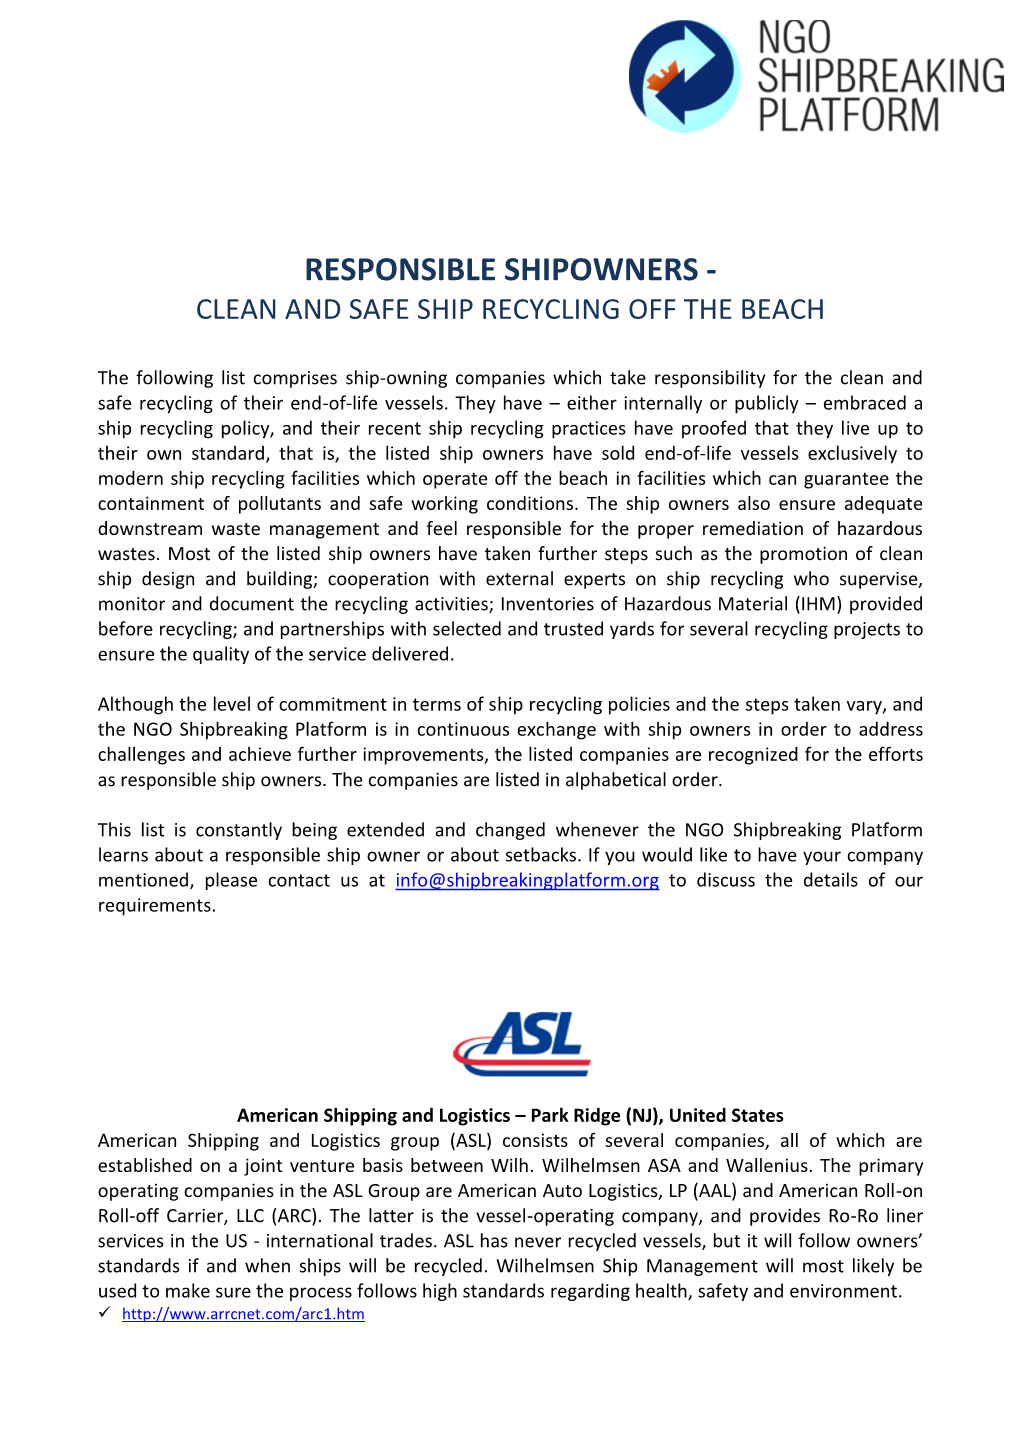 Responsible Shipowners - Clean and Safe Ship Recycling Off the Beach